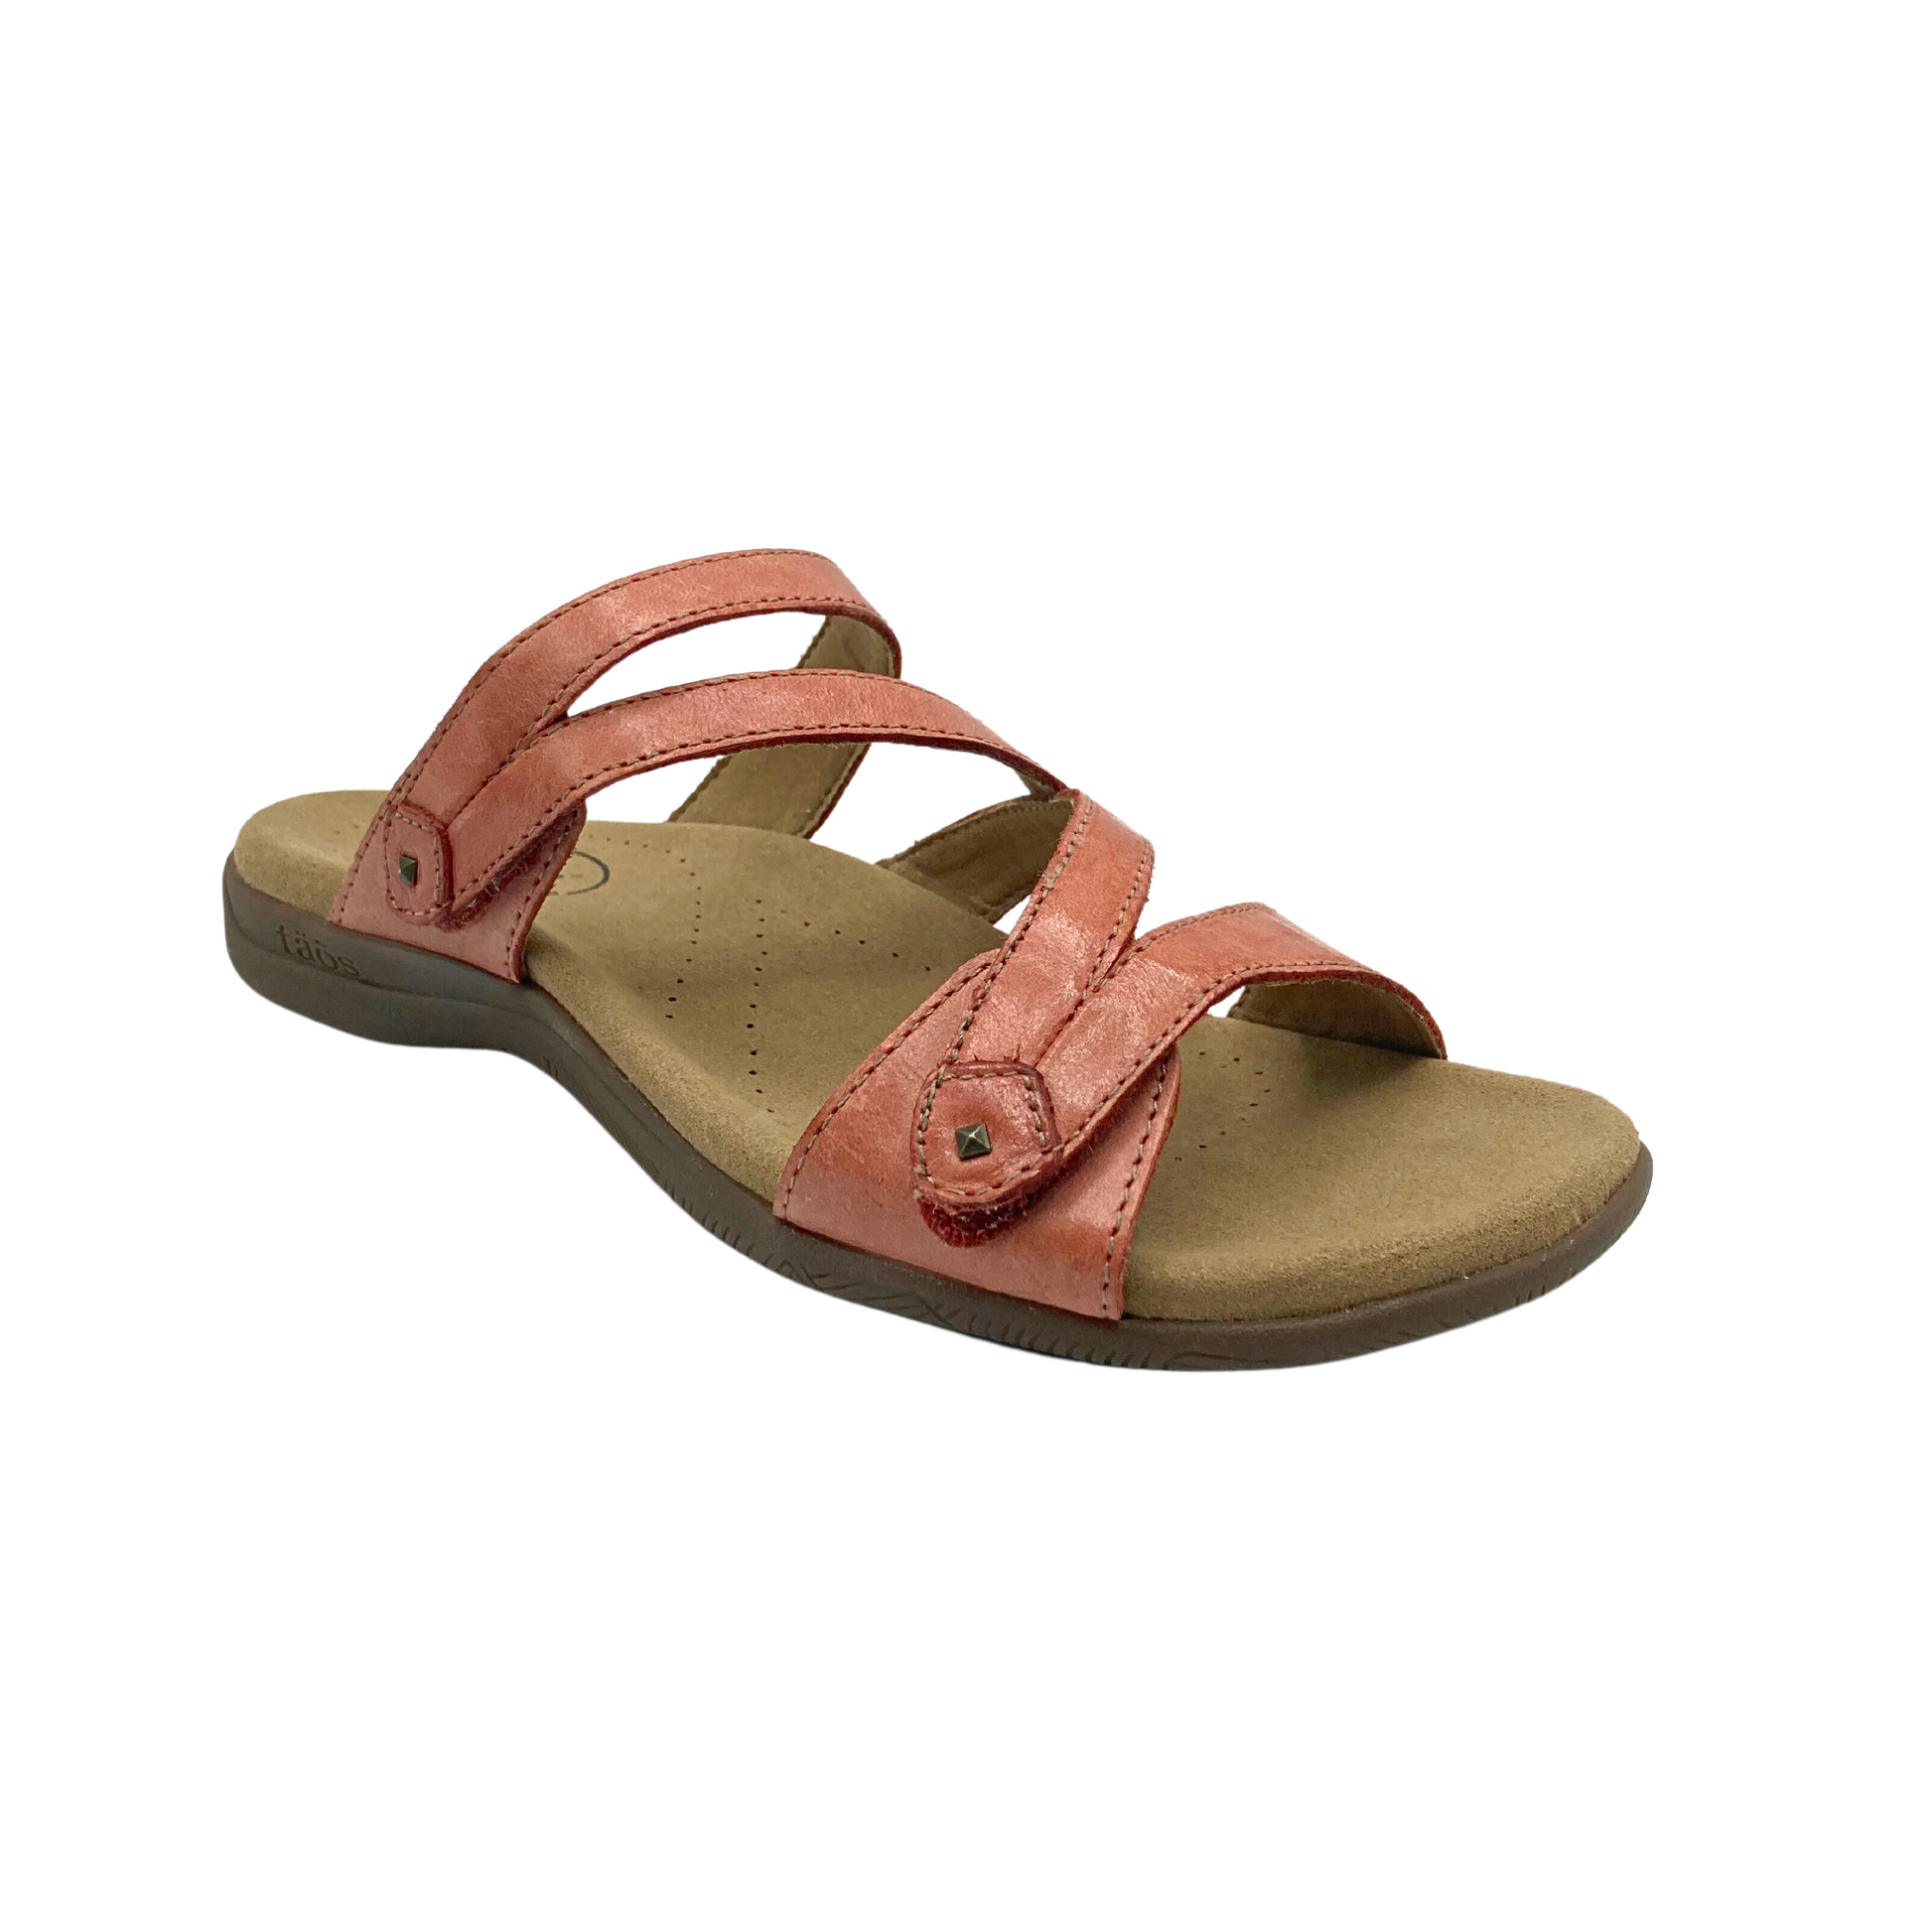 Outside view of right sandal in Taos Double U style Bruschetta color.  Anatomical footbed and great support through adjustable cross straps.